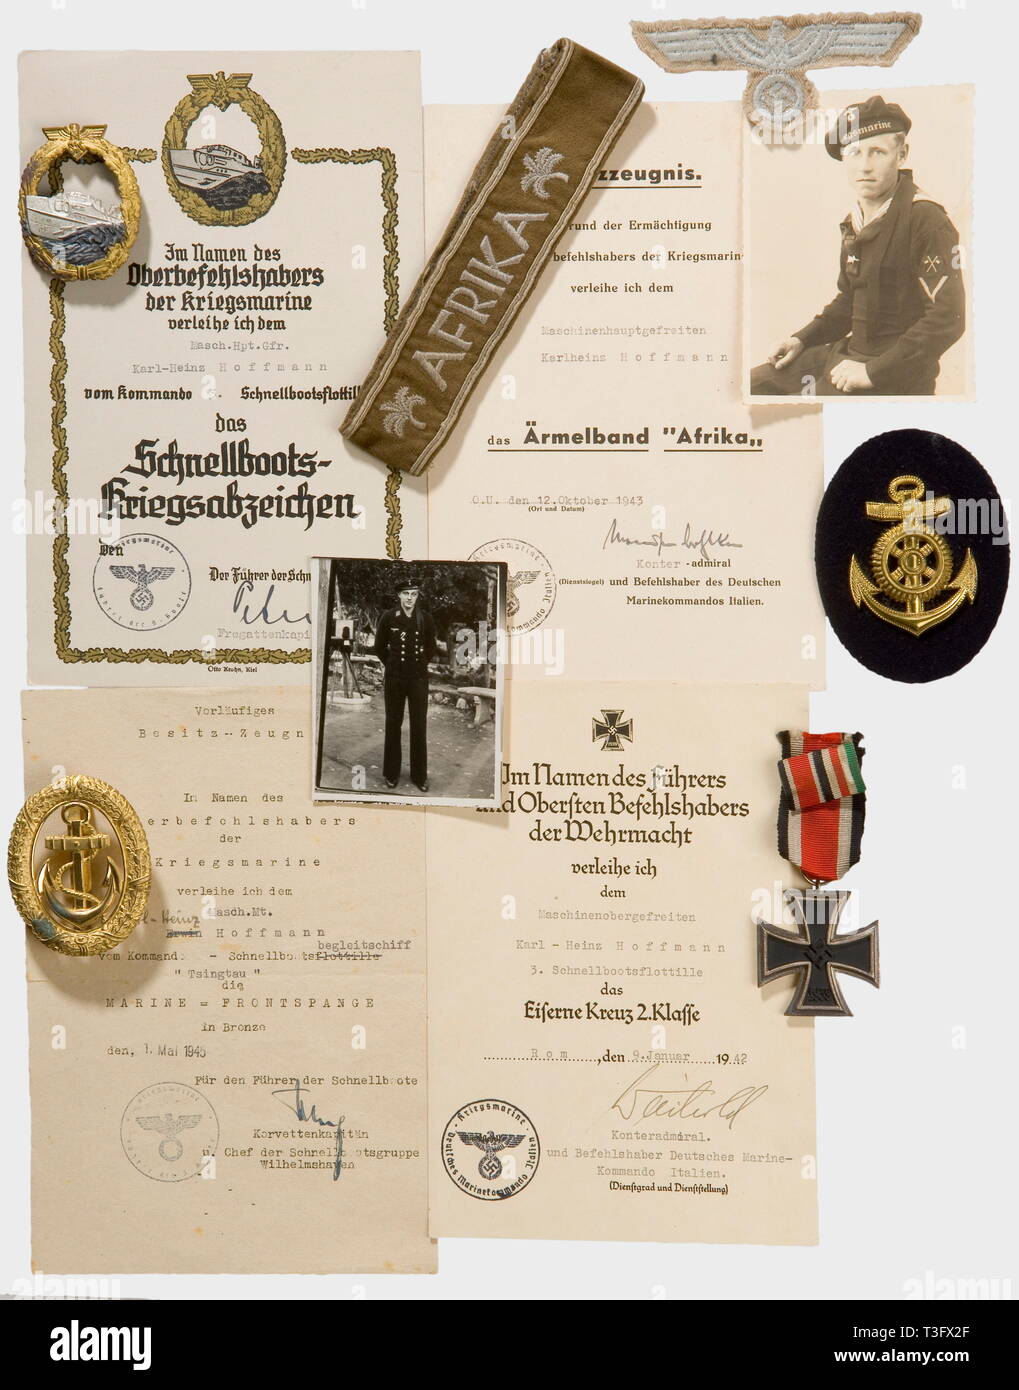 Decorations and documents, for a machinist's mate in the 3rd E-Boat Flotilla 1st model E-Boat War Badge, patinaed non-ferrous metal with a fire-gilt wreath and silver-plated ship. The raised edges polished. Made by 'Schwerin Berlin 68'. Waisted transverse pin. Fastening hook. Award certificate with the depiction of a ship with Ship's Commander Rudolf Petersen's ink signature. Iron Cross 2nd Class with ribbon, and the citation for 9 January 1942 with the ink signature of Rear Admiral, and Commander of the German Navy in Italy, Weichold. 'Afrika' sleeve band (tailor made, cam, Editorial-Use-Only Stock Photo